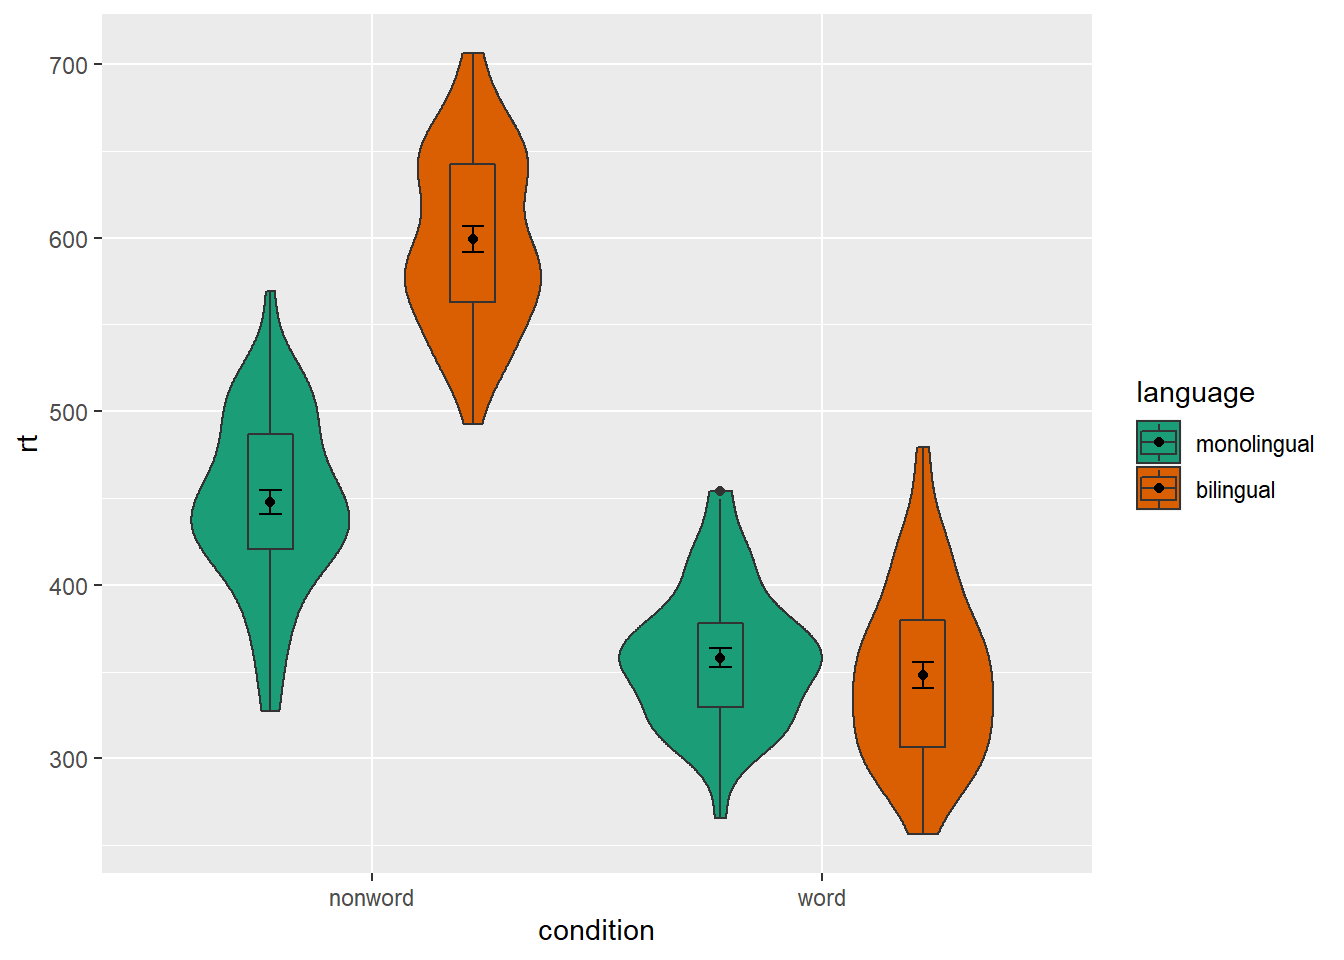 Grouped violin-boxplots with repositioning.